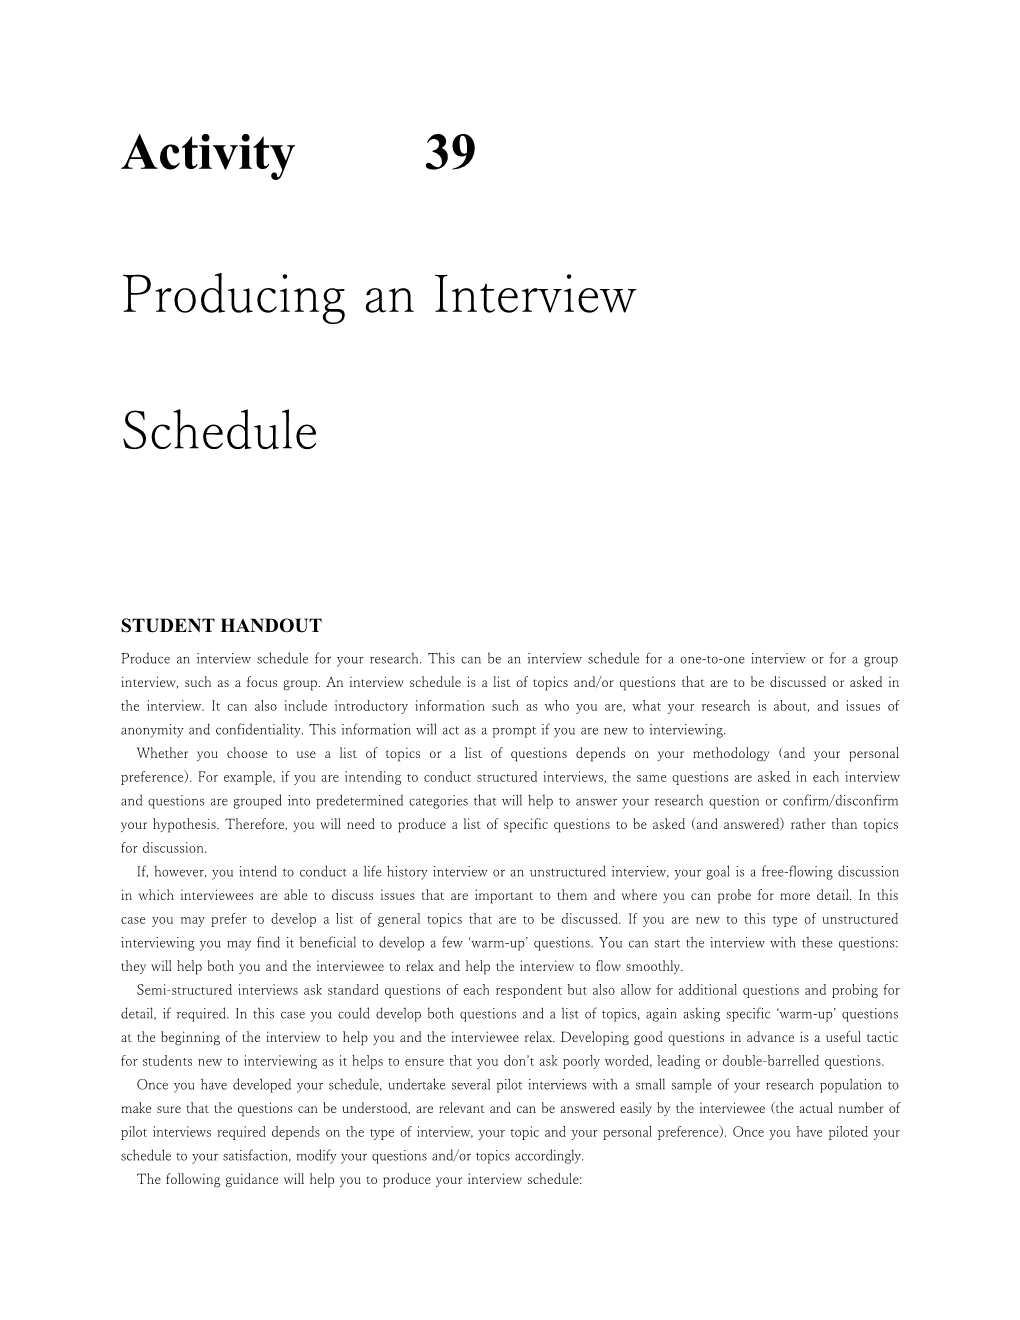 Producing an Interview Schedule